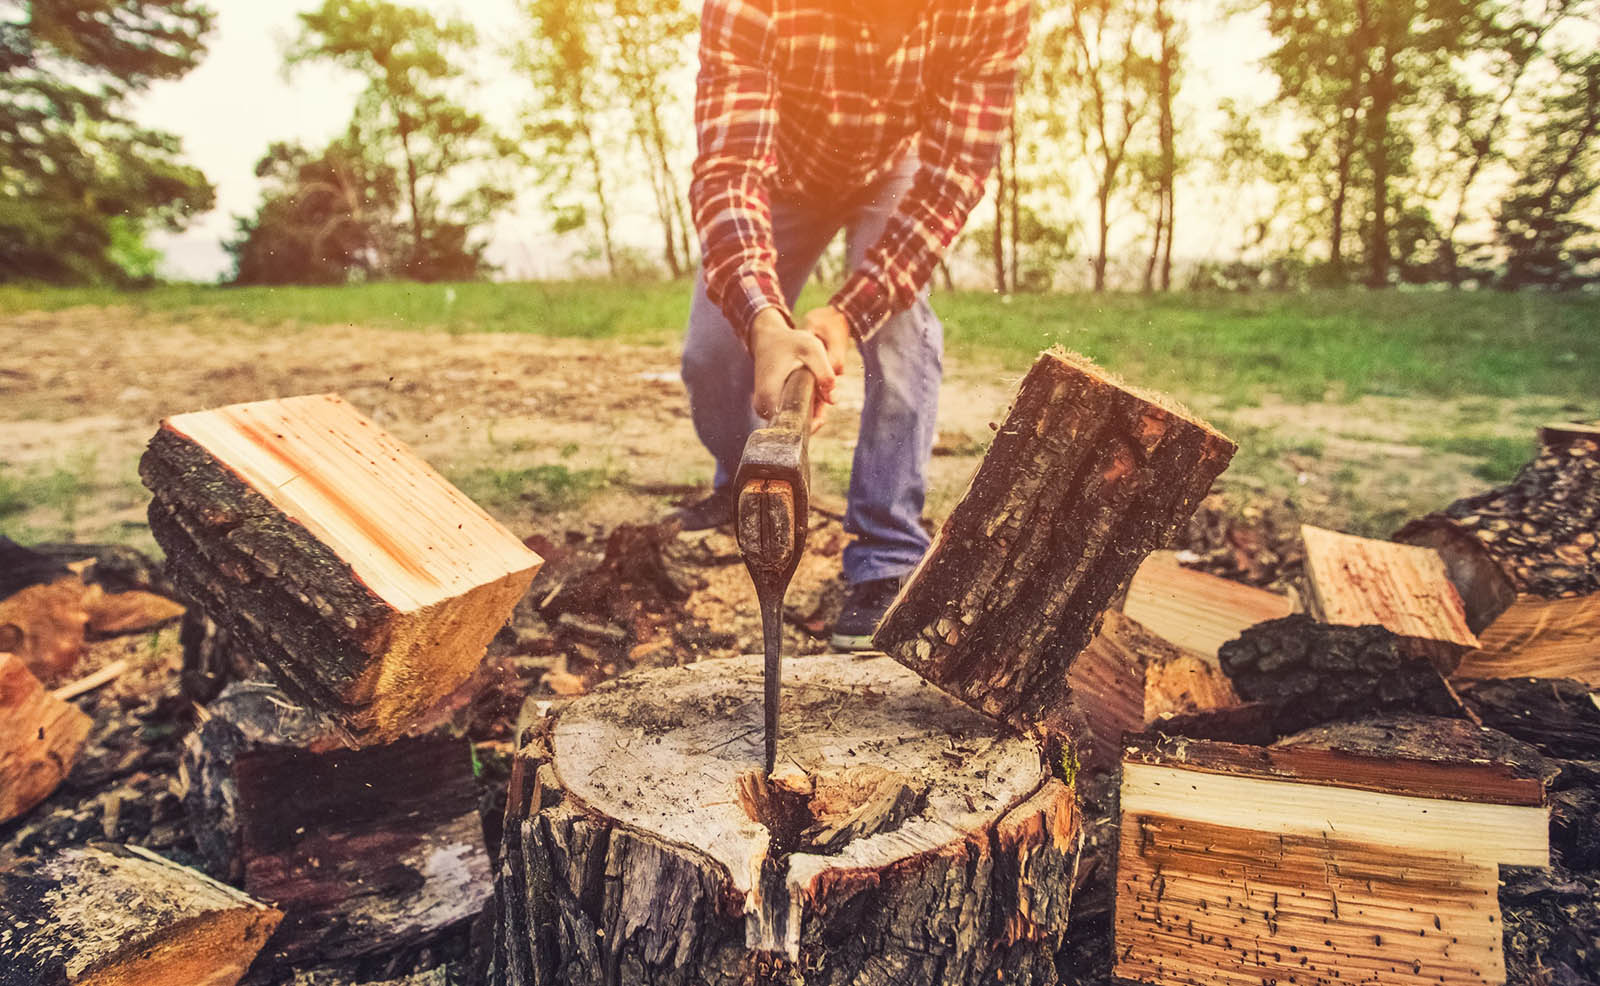 People With Exceptionally High IQ Will Find This 20-Question Mixed Knowledge Test Exceptionally Easy Lumberjack Splitting A Log In Two With An Axe